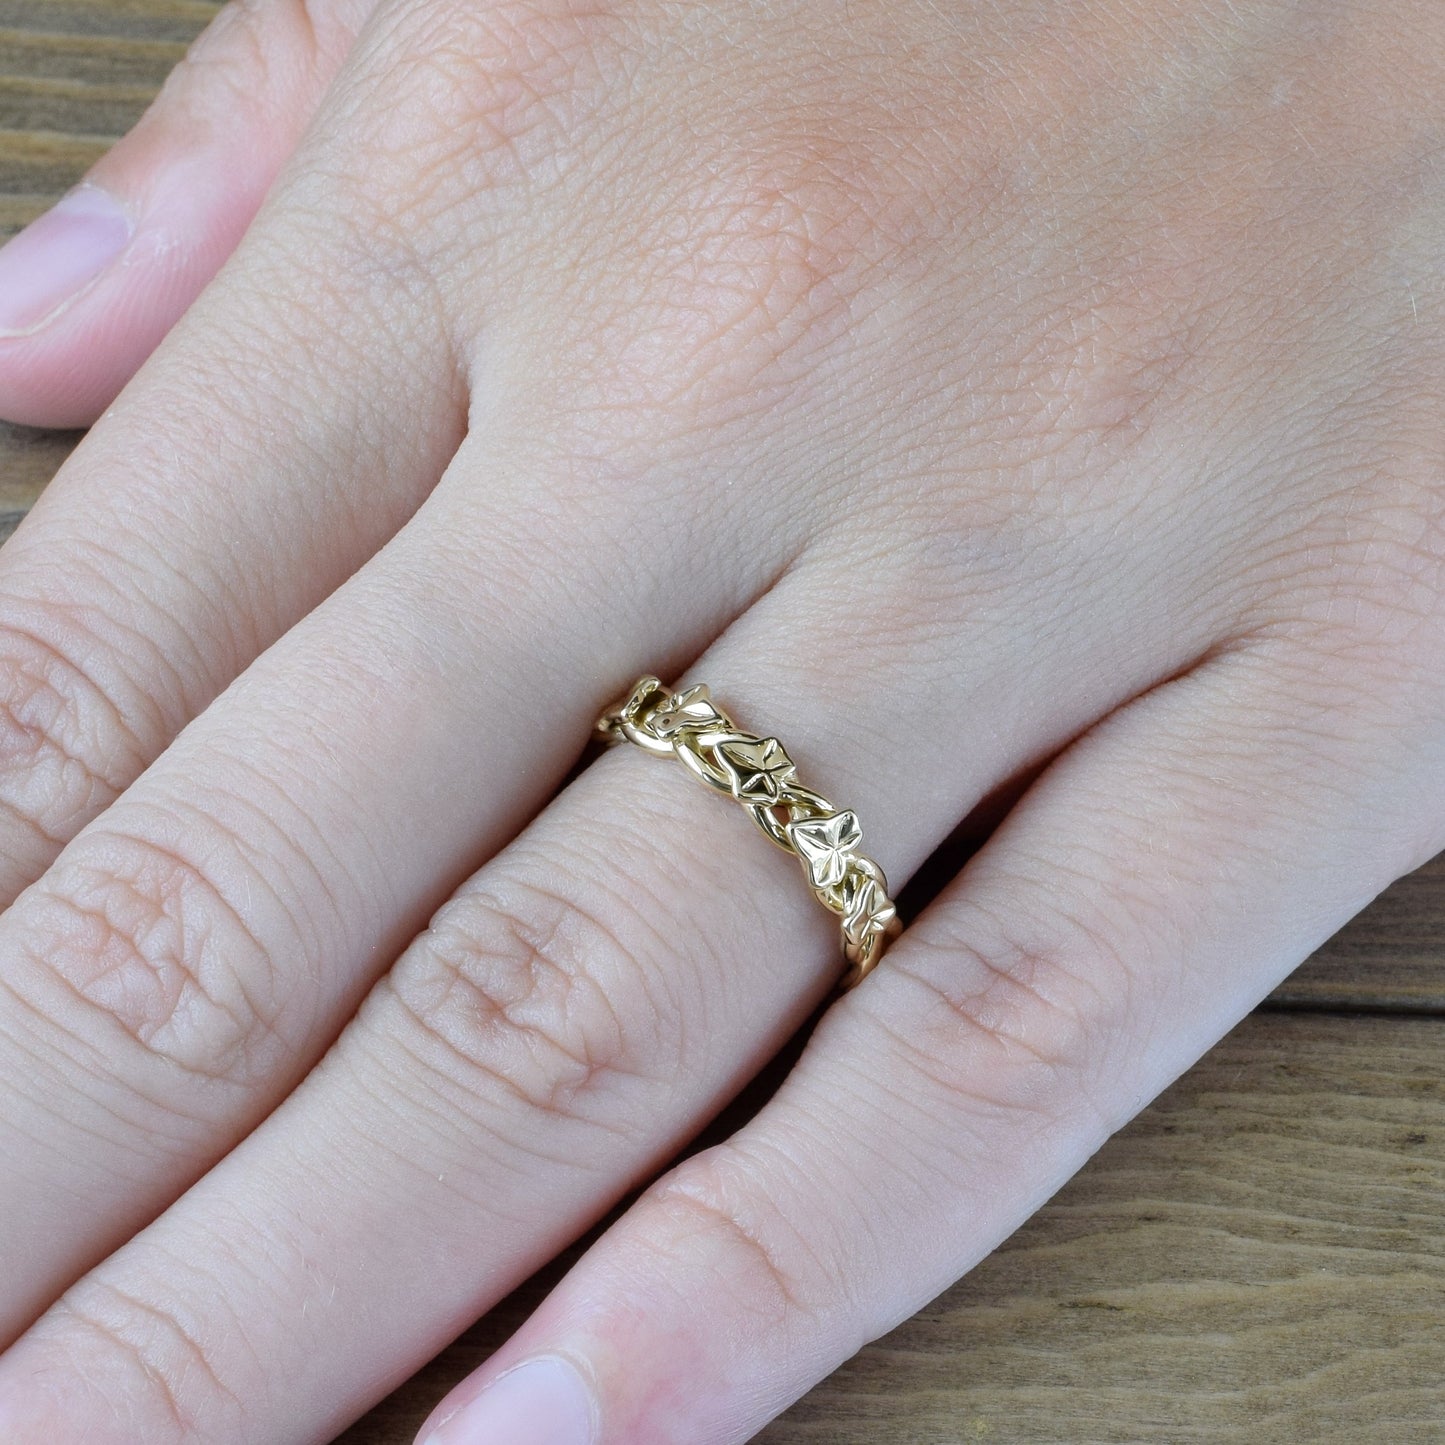 ivy leaves and vines ring in yellow gold on finger